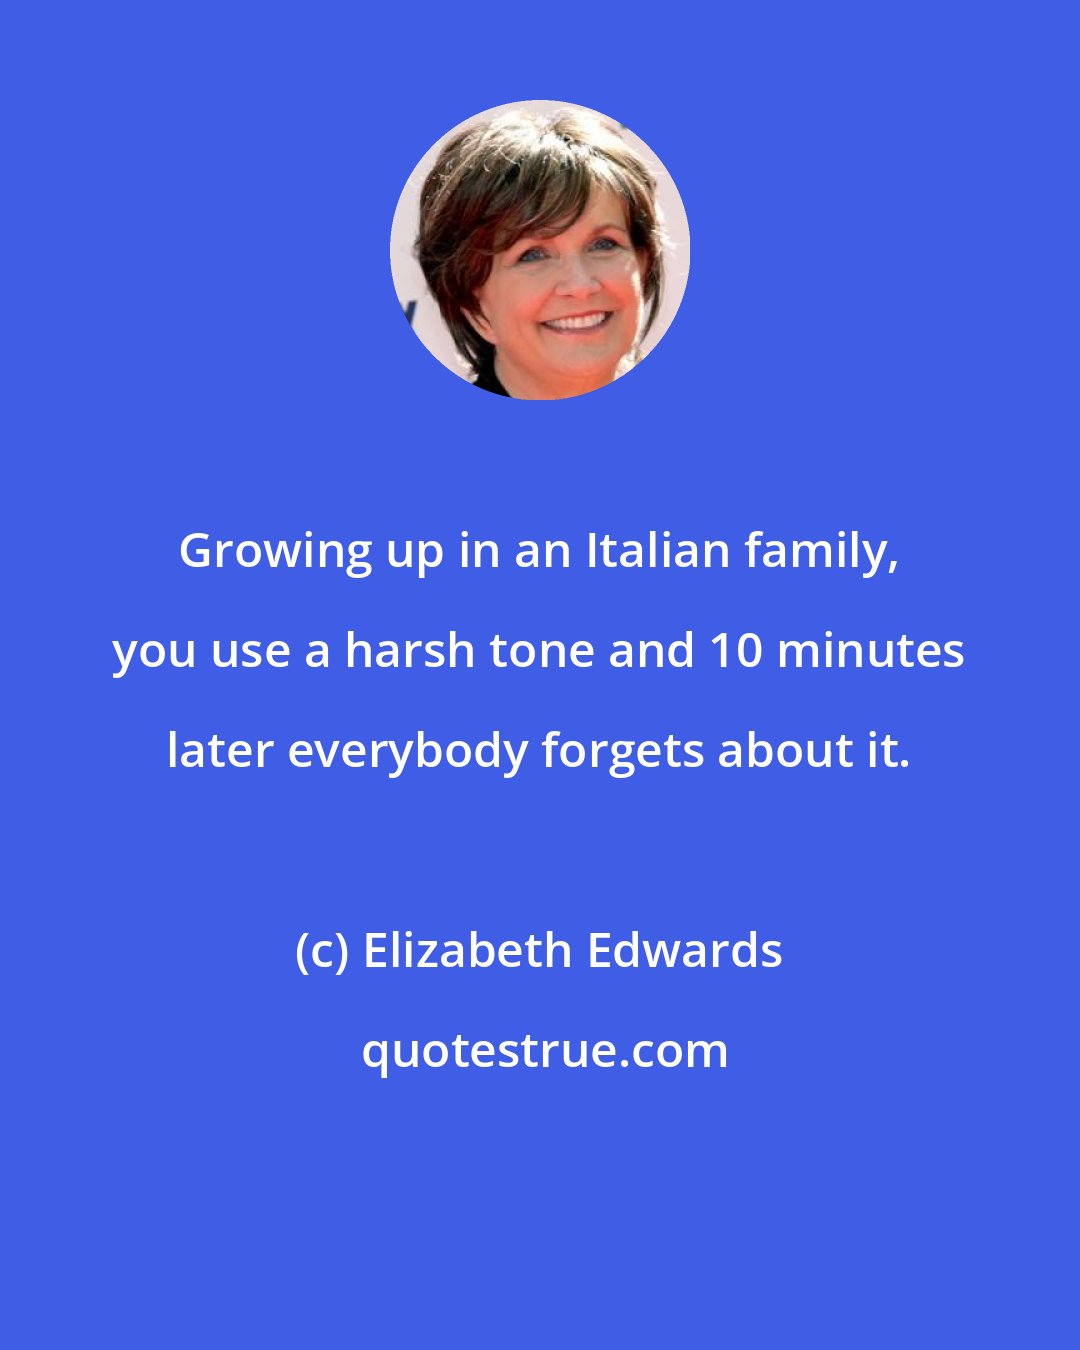 Elizabeth Edwards: Growing up in an Italian family, you use a harsh tone and 10 minutes later everybody forgets about it.